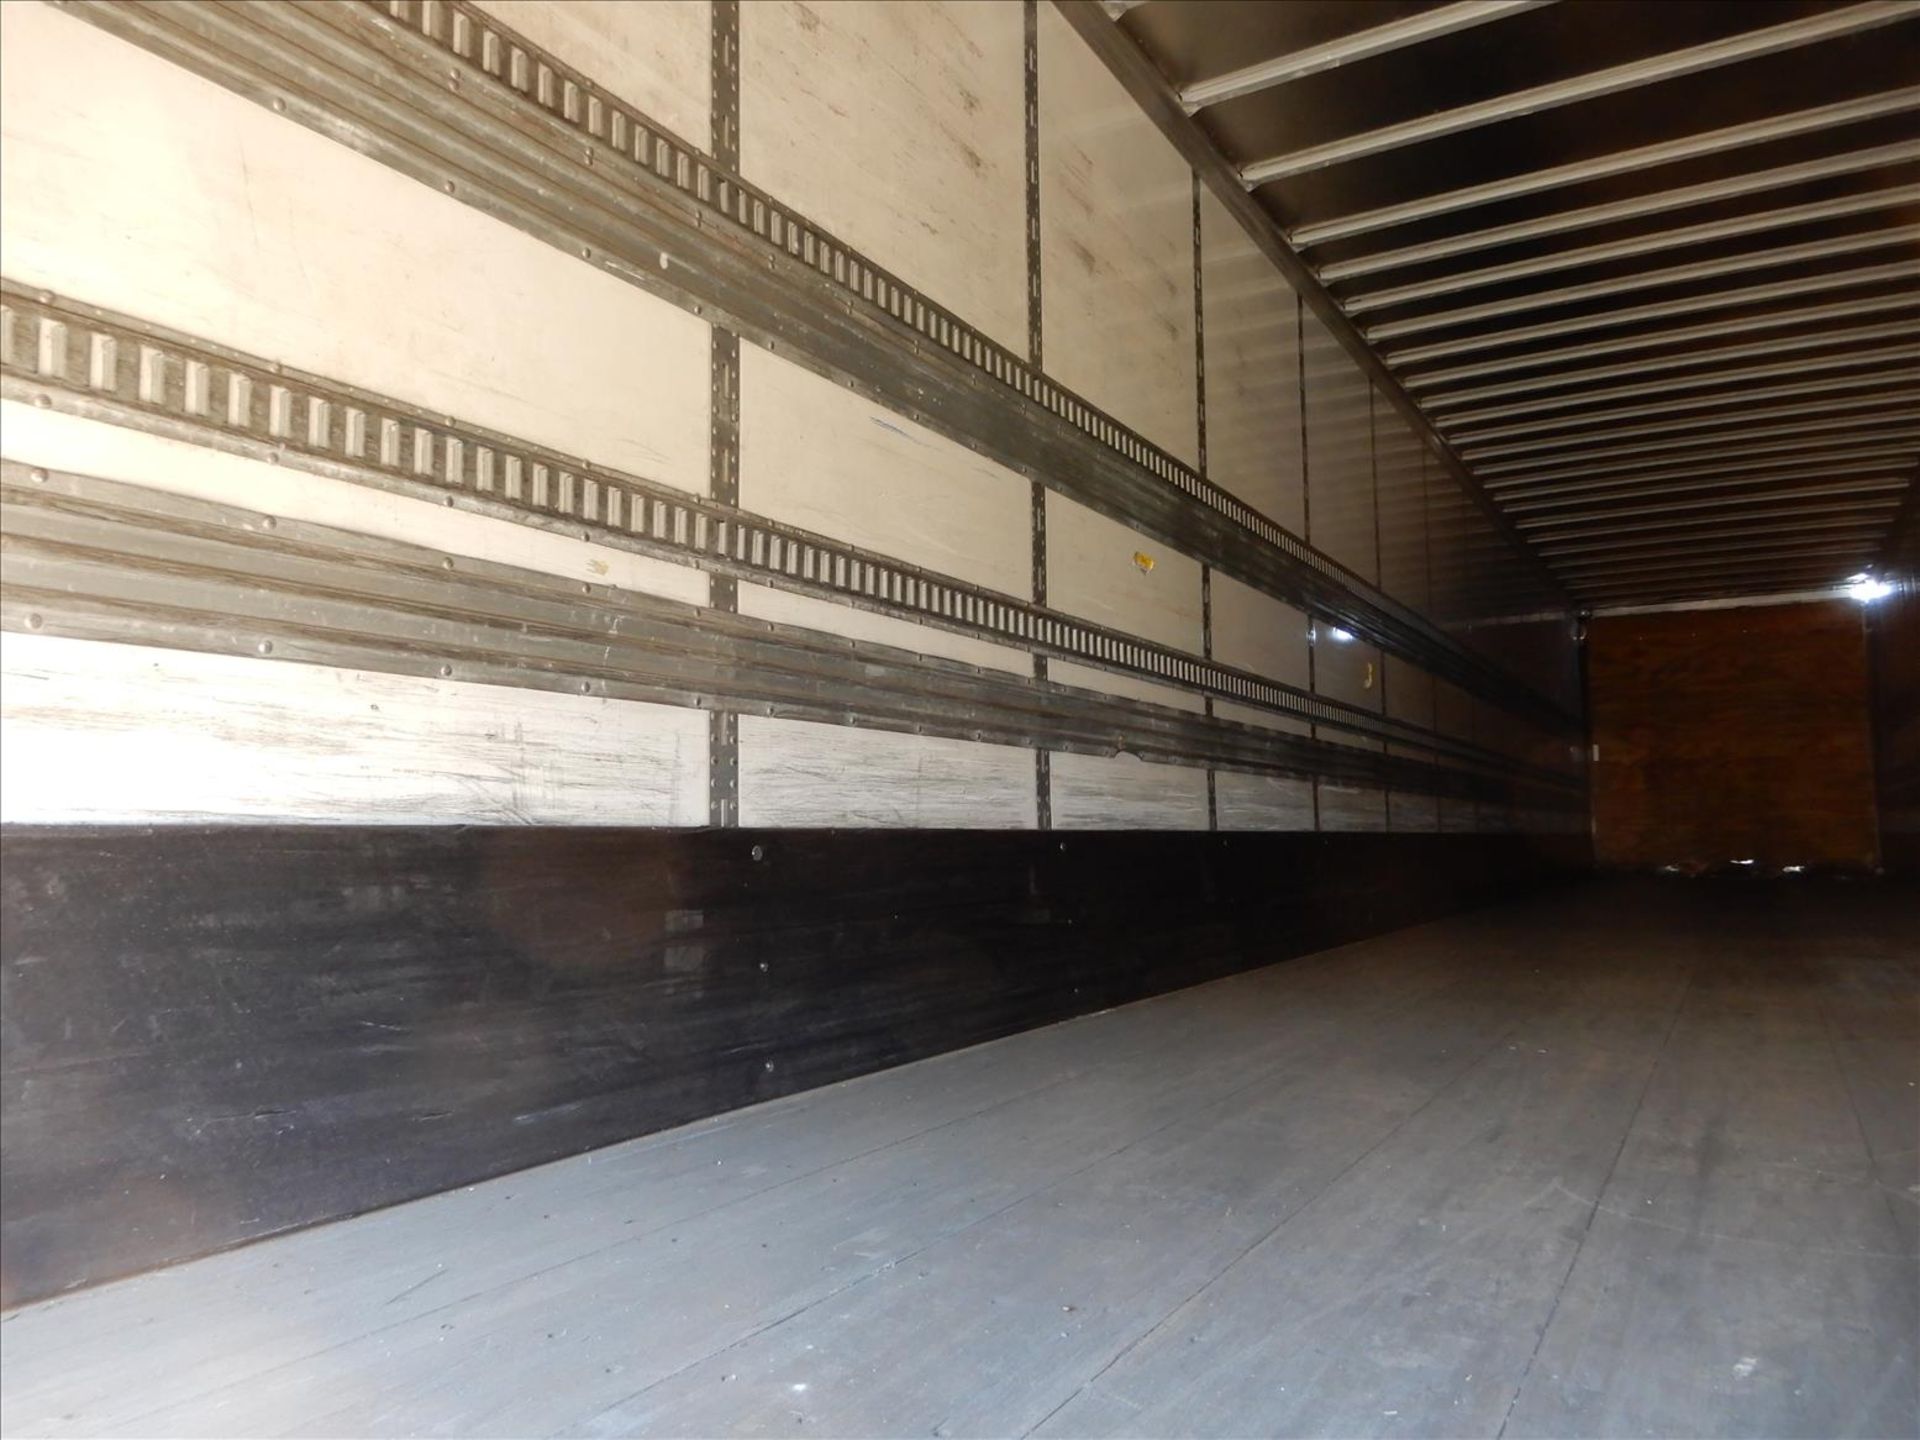 2012 Stoughton Trailer - Located in Indianapolis, IN - Image 23 of 30